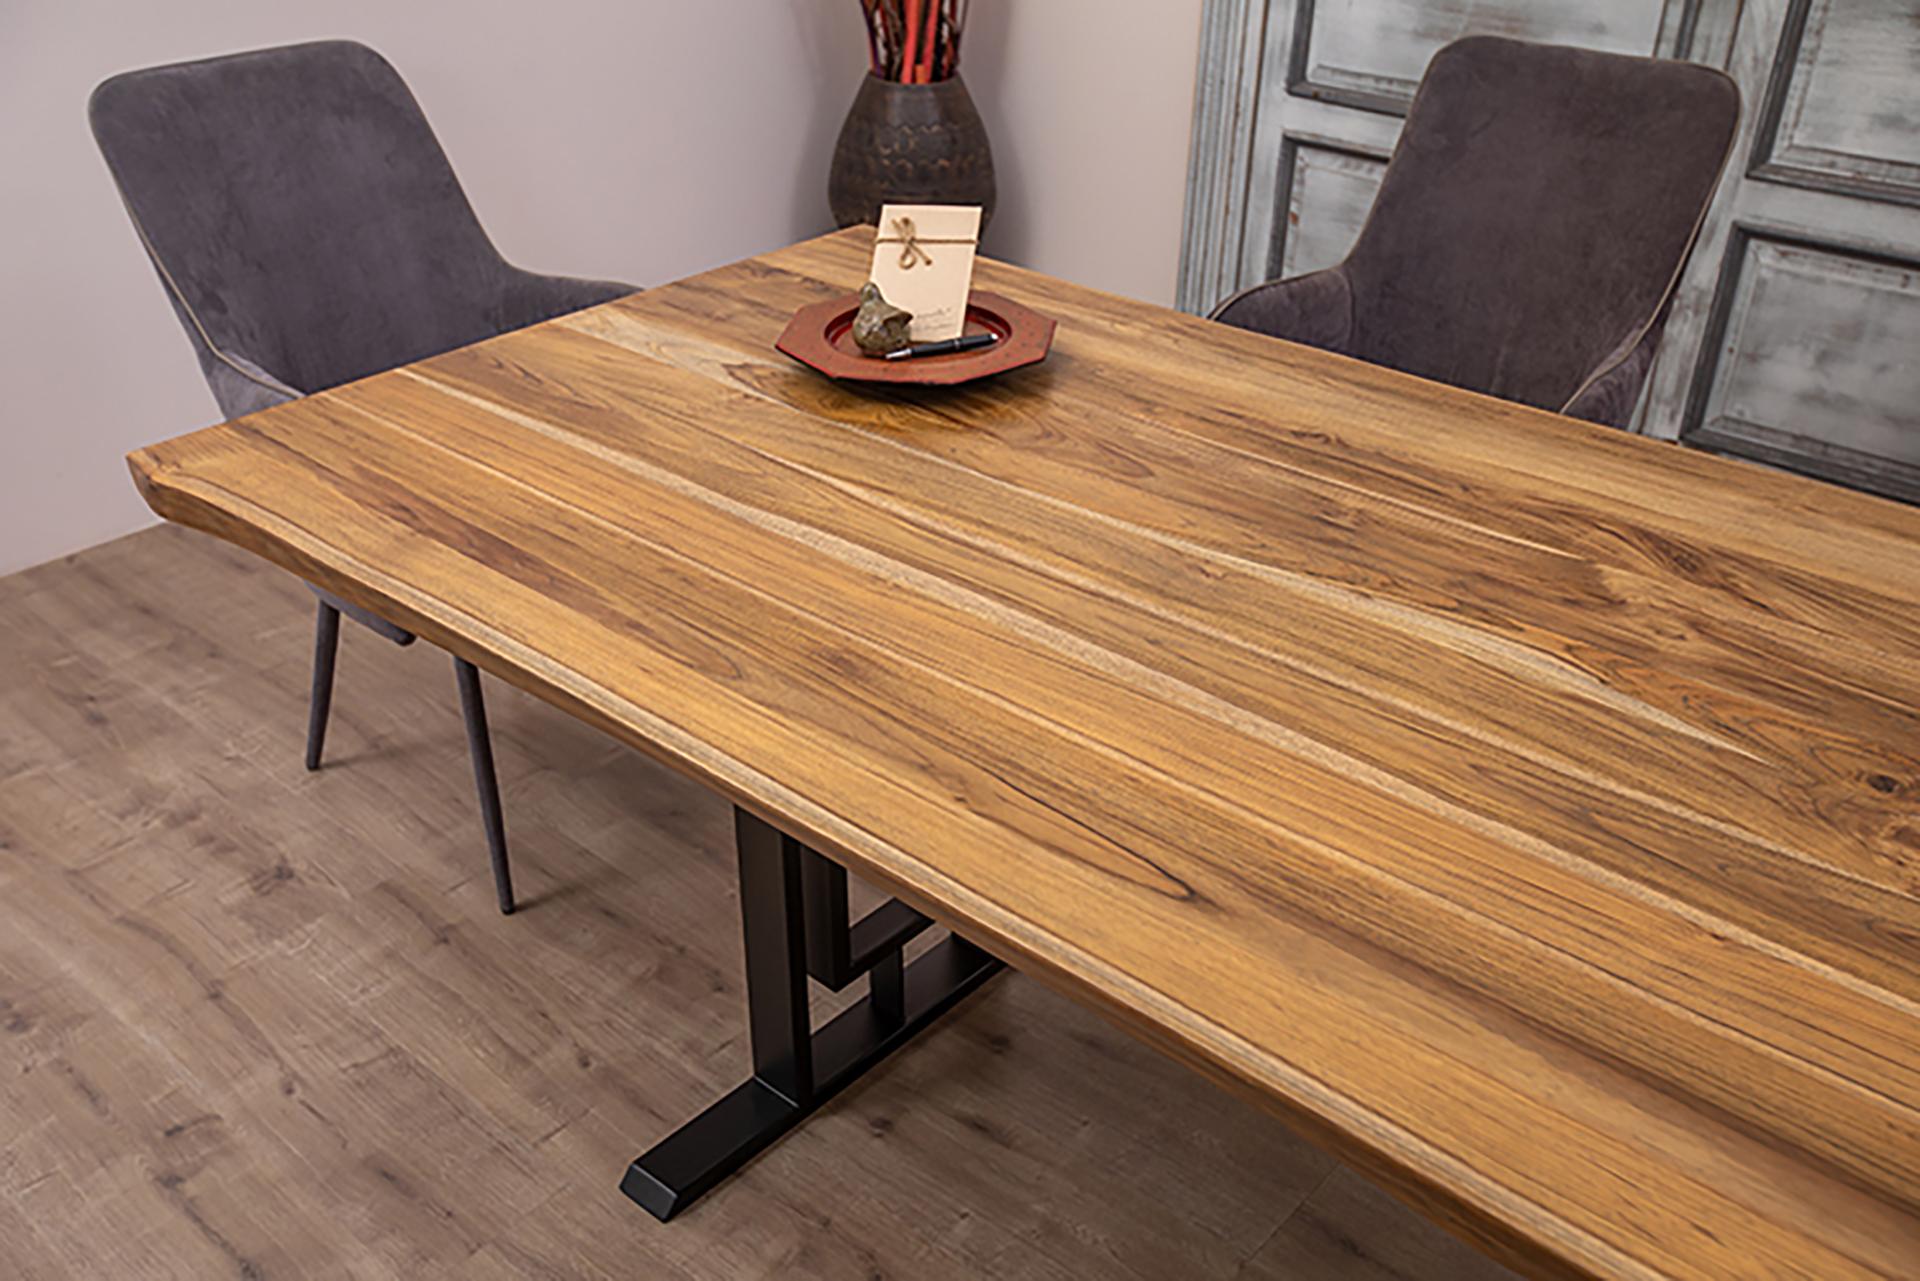 Hand-Crafted 100% Solid Teak Live Edge Dining Table in Autumn, Color Chip Sample Available For Sale